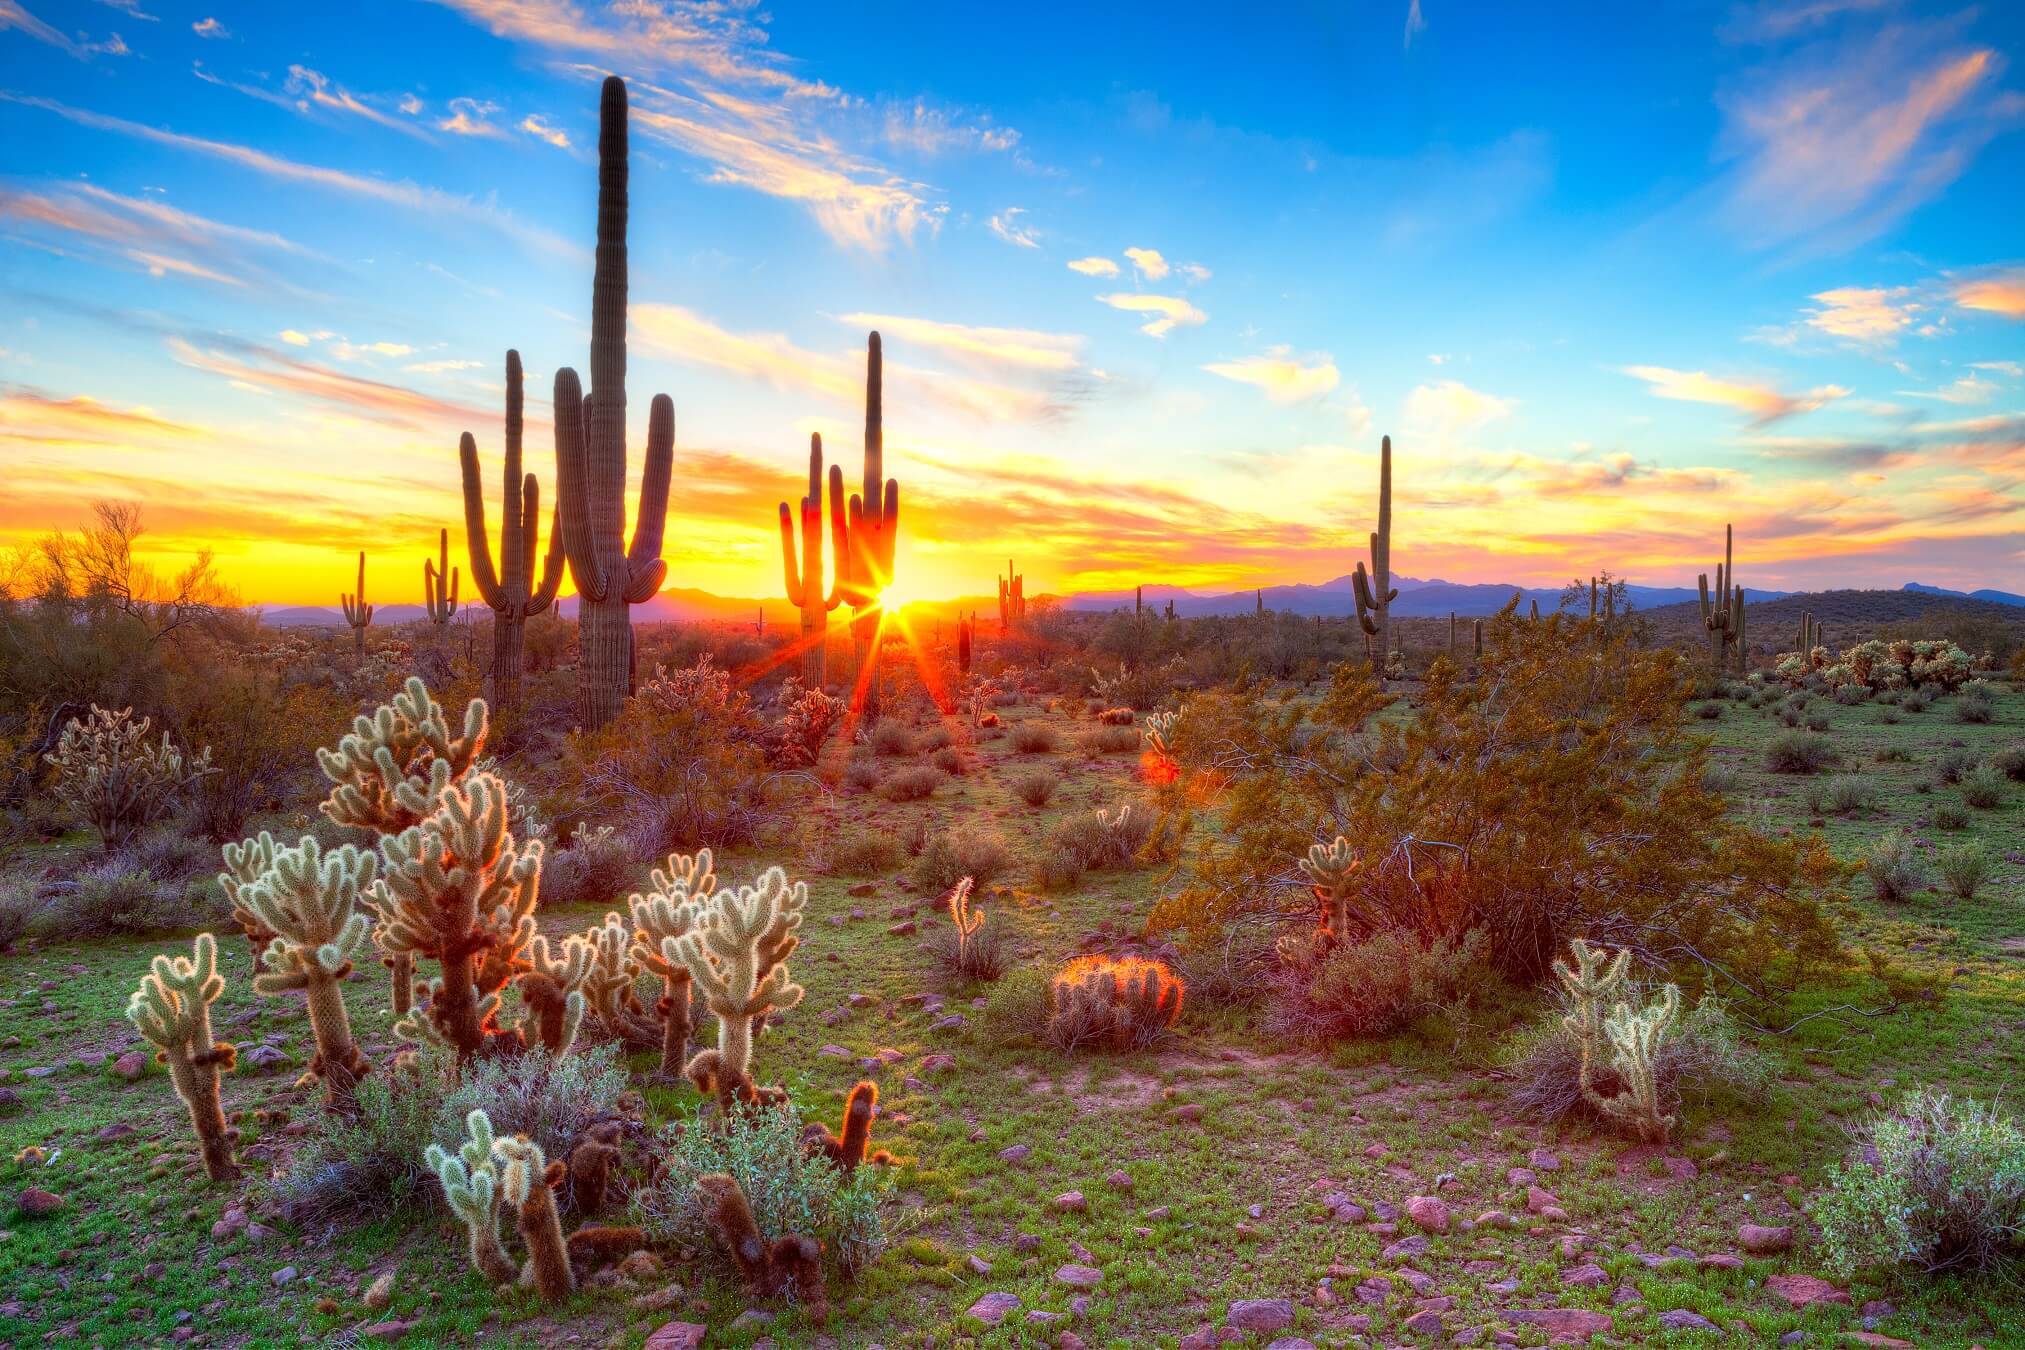 Pictures of Arizona don't get more beautiful than this colorful desert shot.